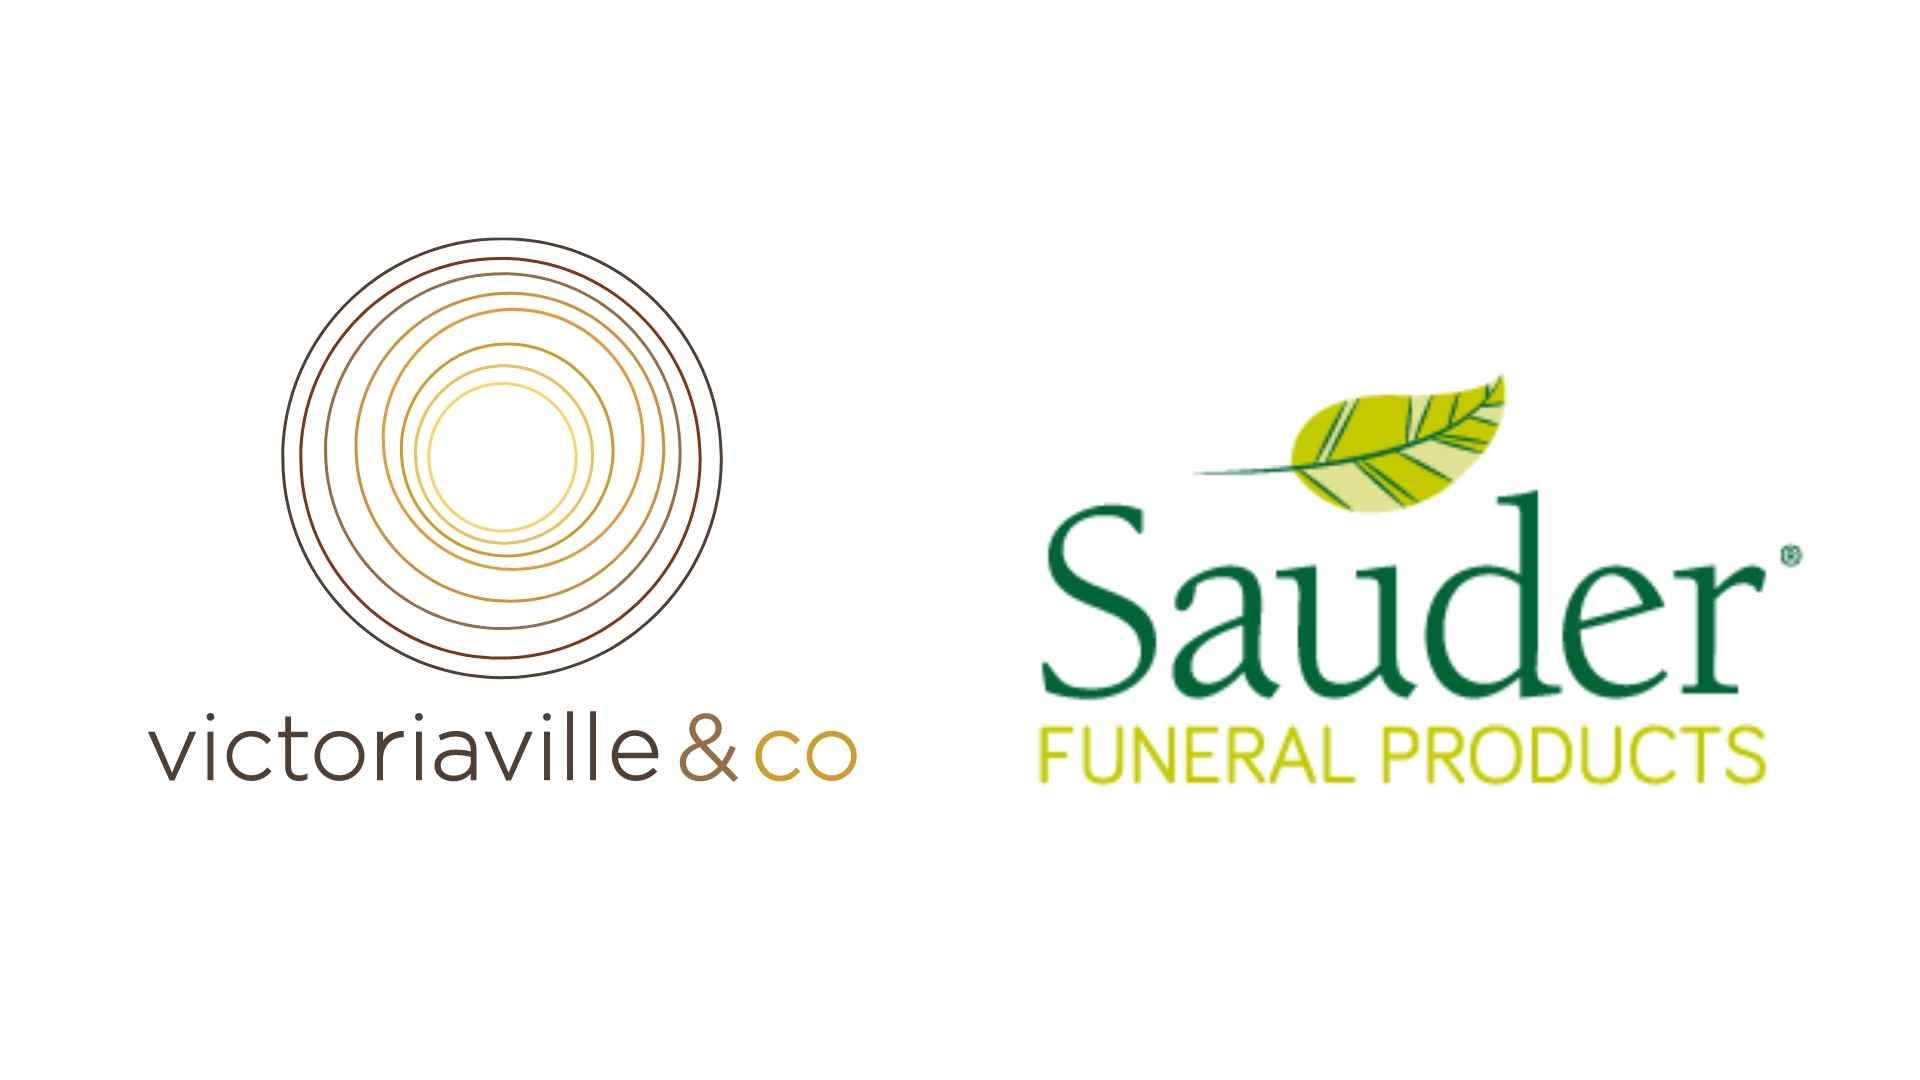 Victoriaville & Co. and Sauder Funeral Products | Strategic Investment and Partnership